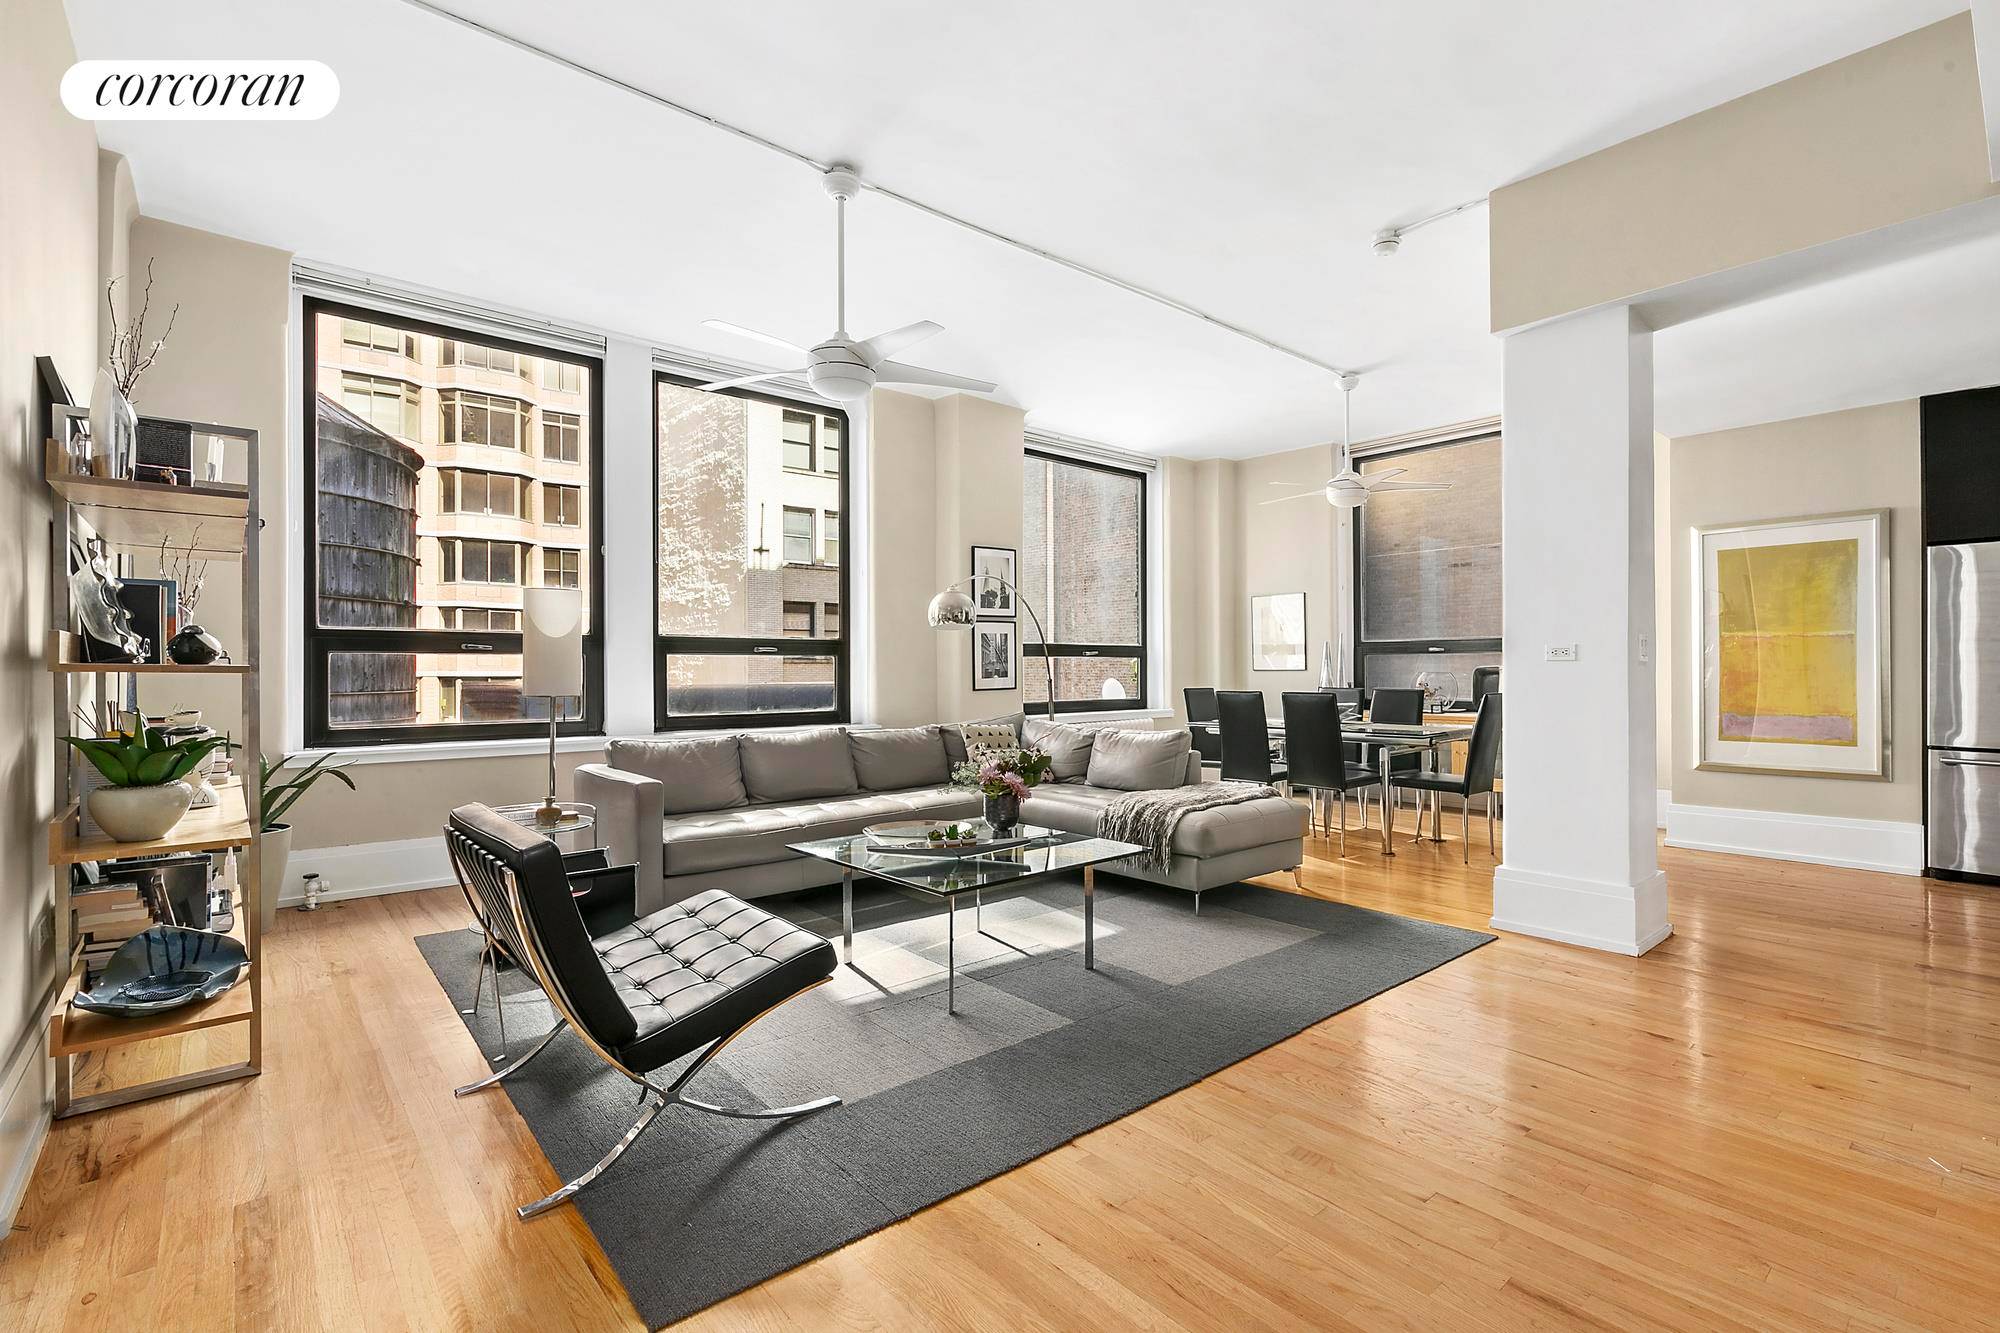 Sprawling 2200sf 3 Bed, 3 bath Pre War duplex loft penthouse with private outdoor spaces in the heart of The Financial District.